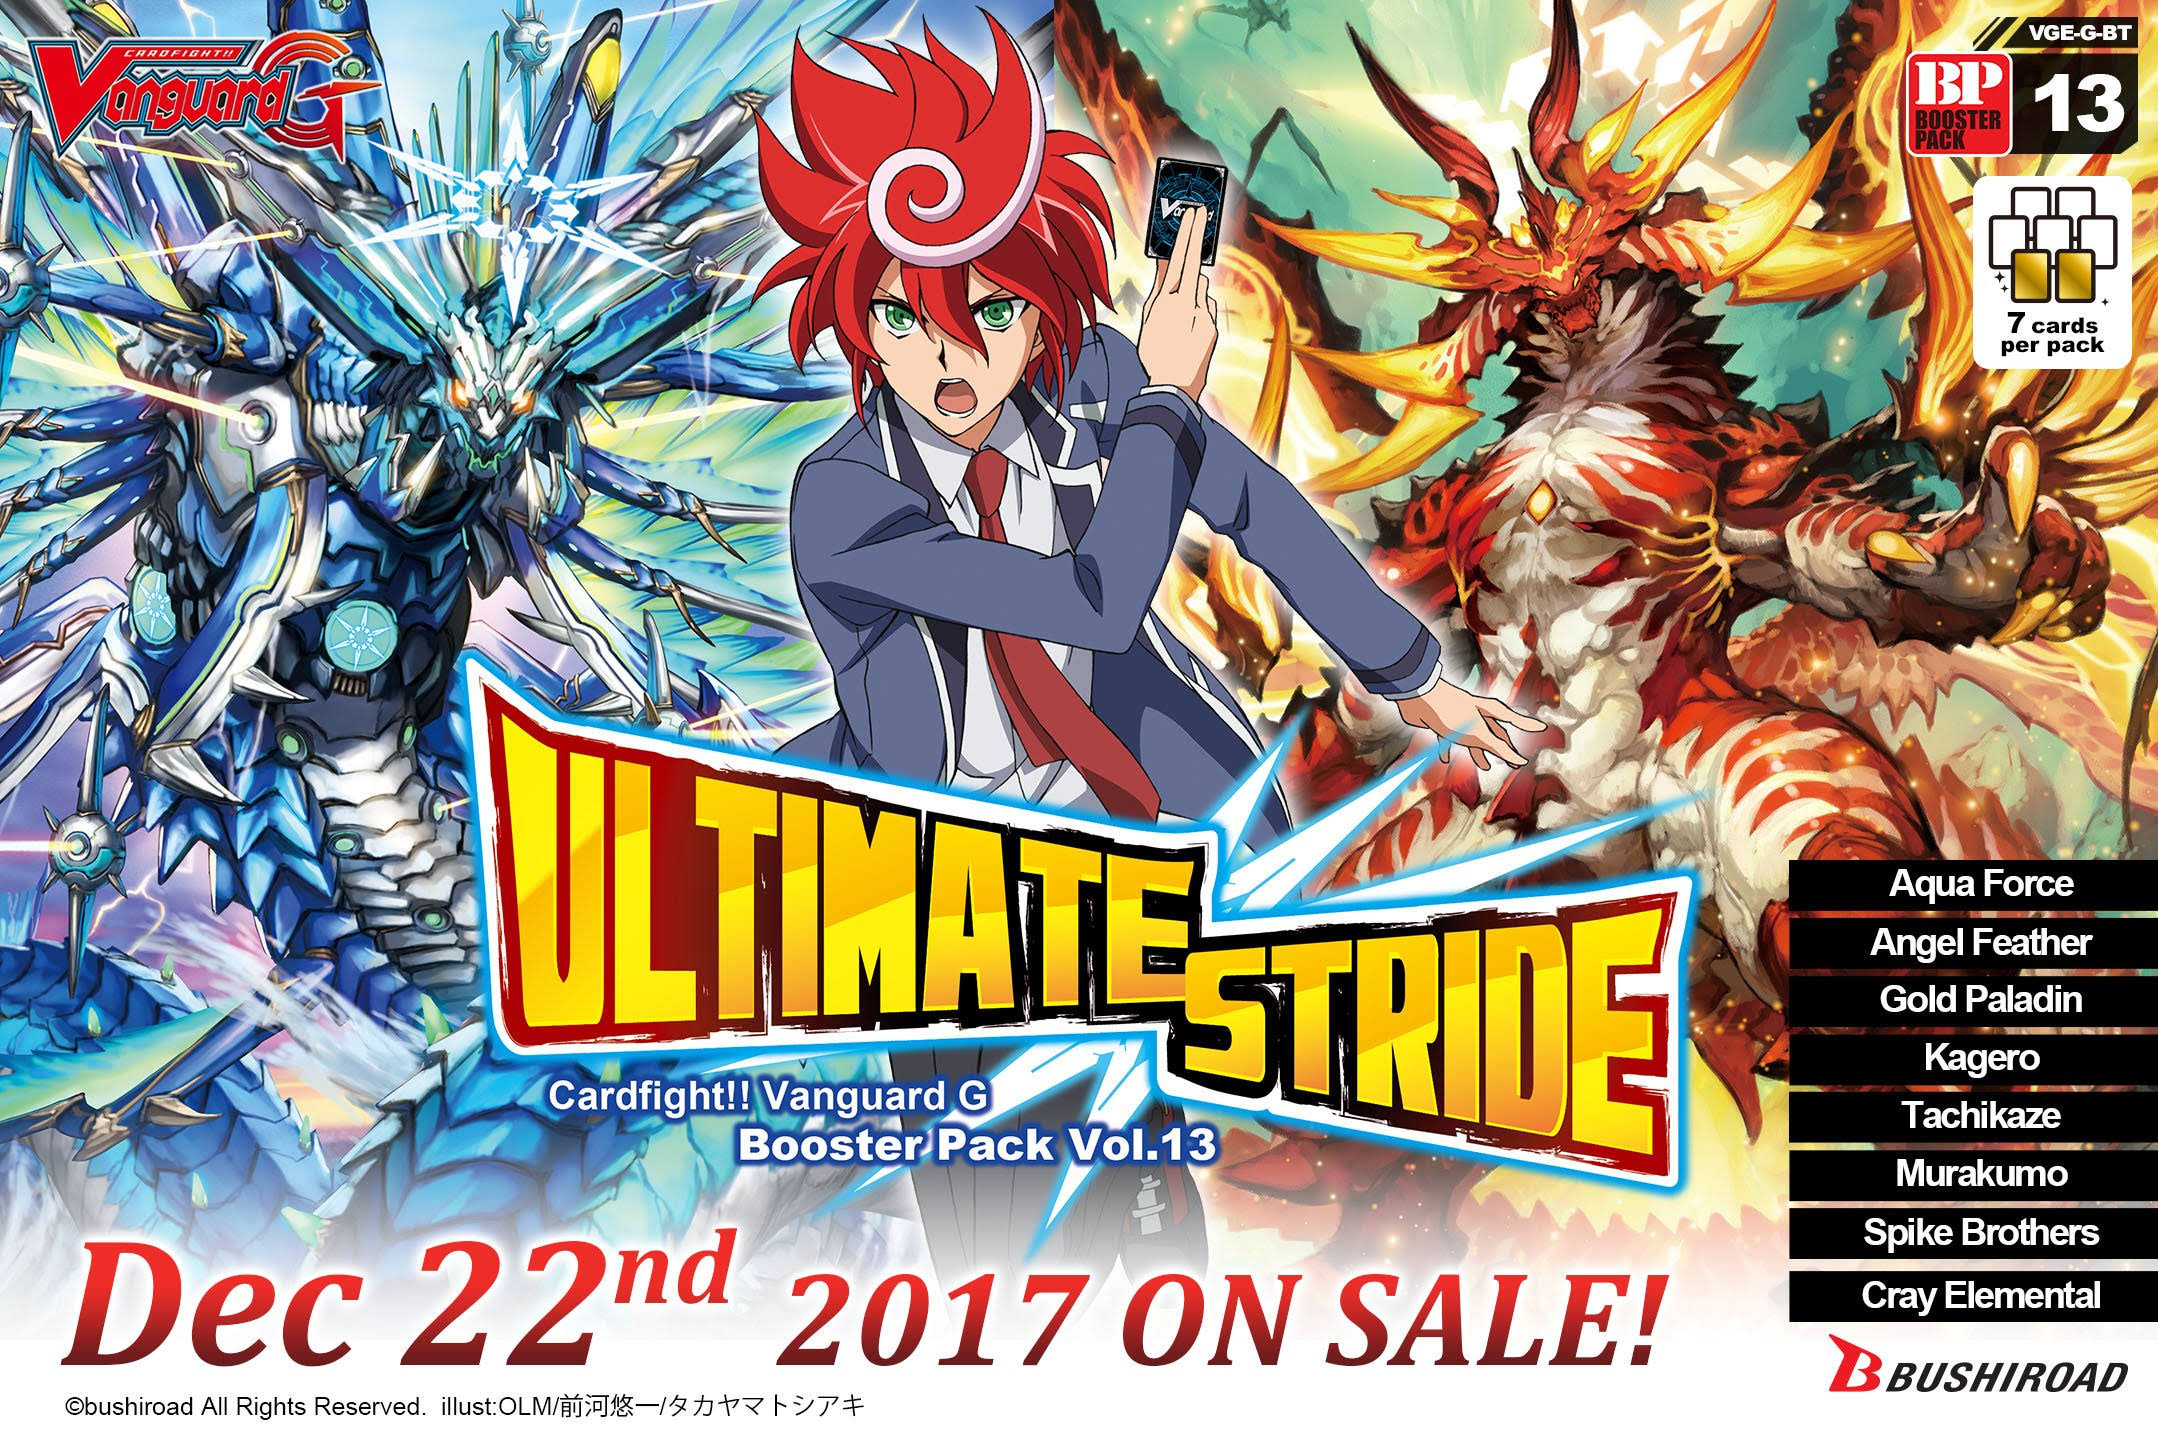 Cardfight Vanguard: Ultimate Stride Booster Box